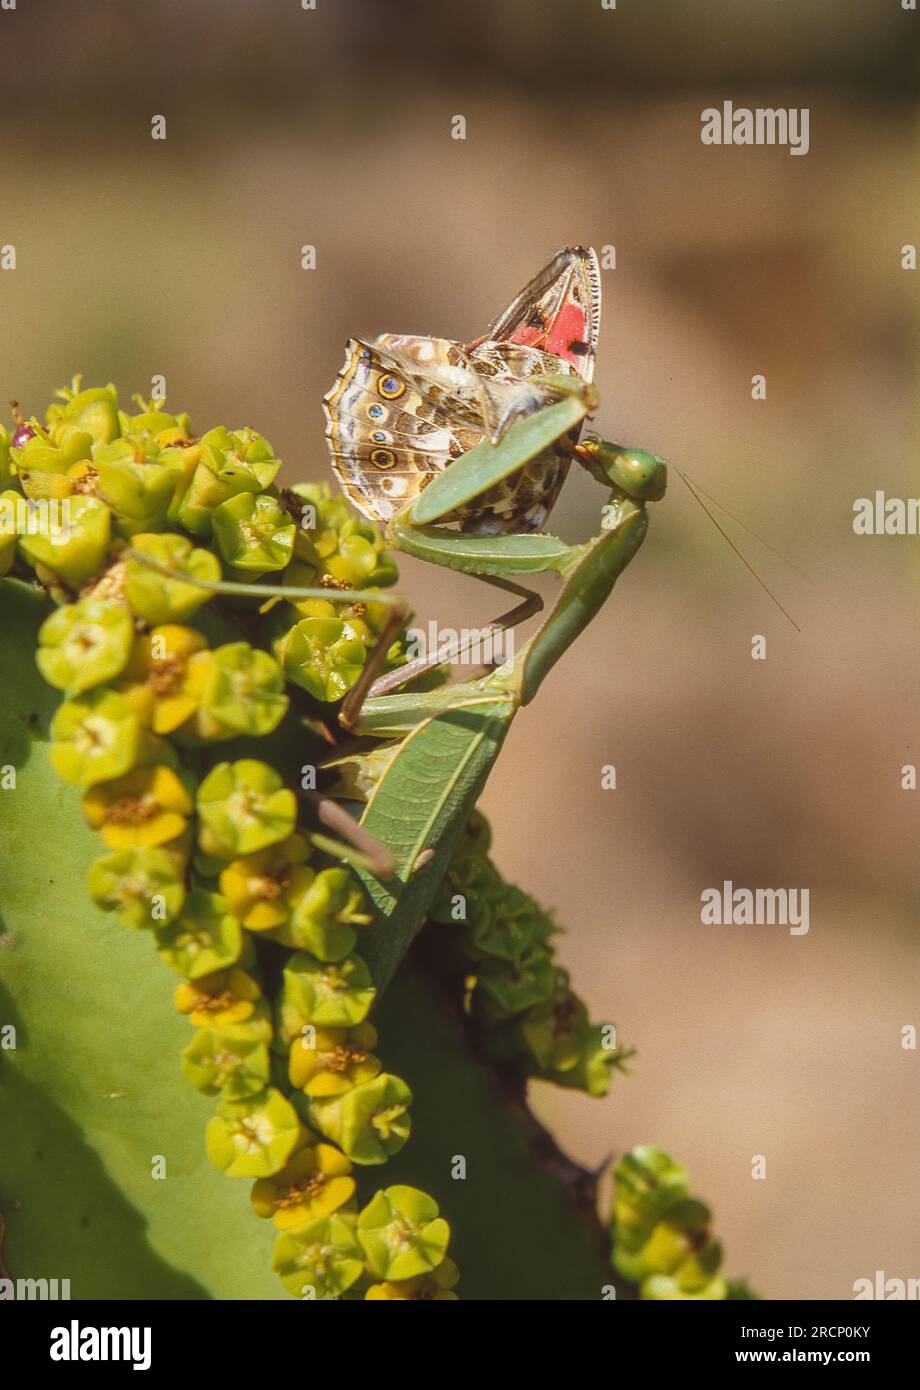 A praying mantis, on a Euphorbia plant, feeding on a butterfly in the Lowveld National Botanical Garden in Mpumalanga Province in South Africa. Stock Photo